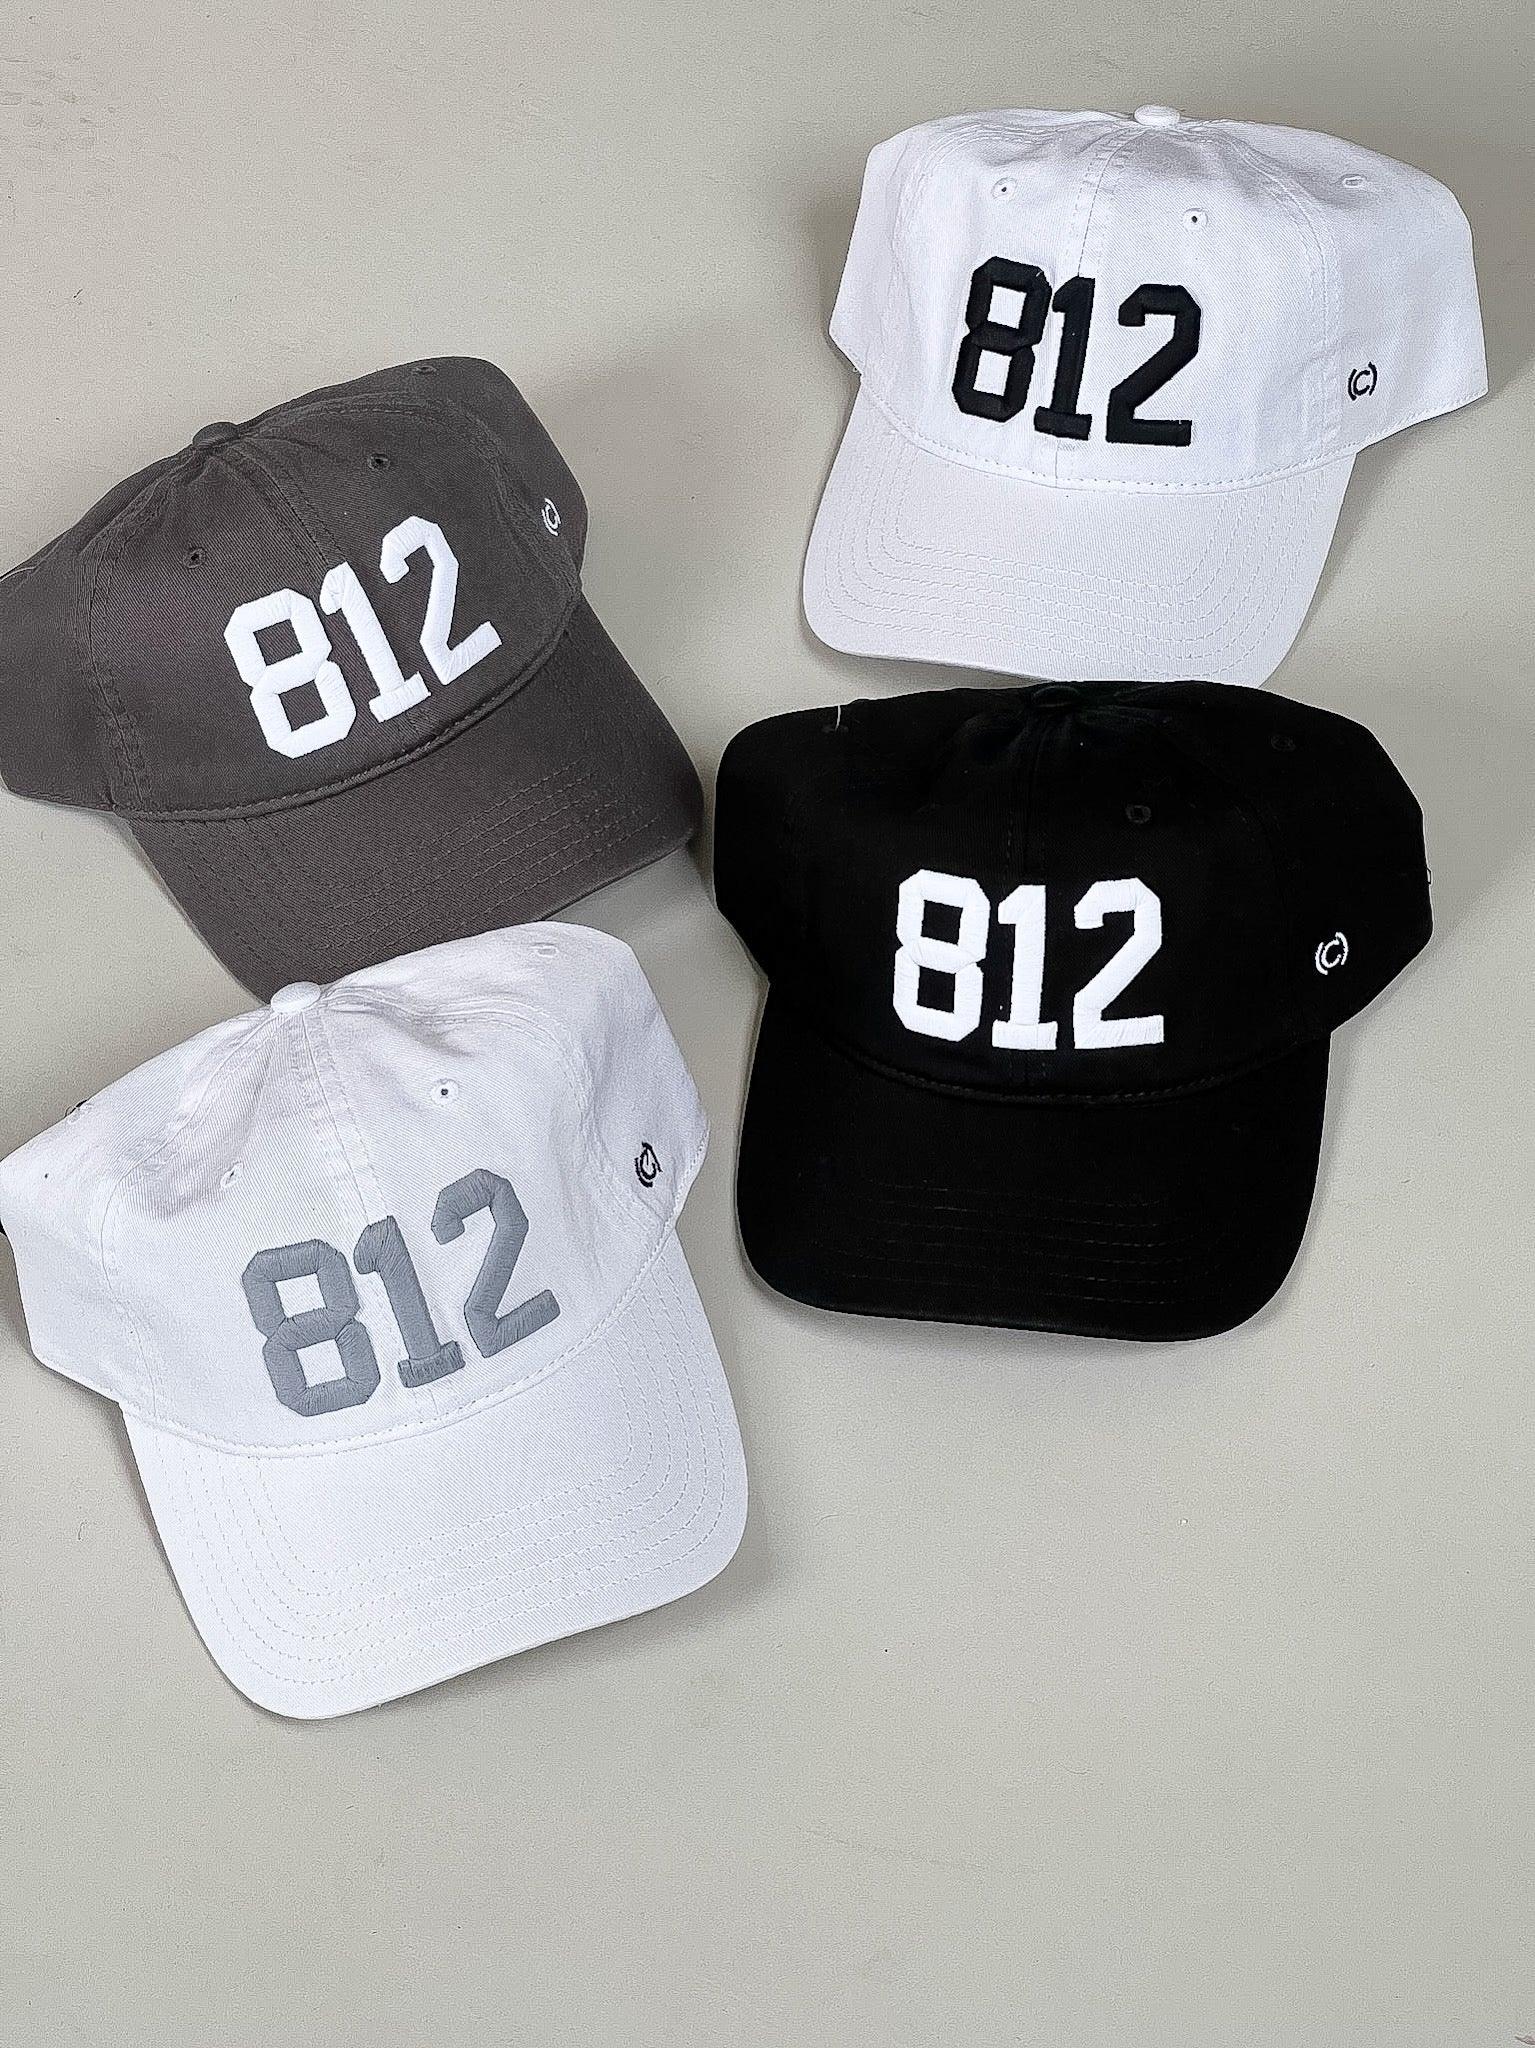 Represent the Hoosier state in the 812 dad hat, black with white stitching or other color options